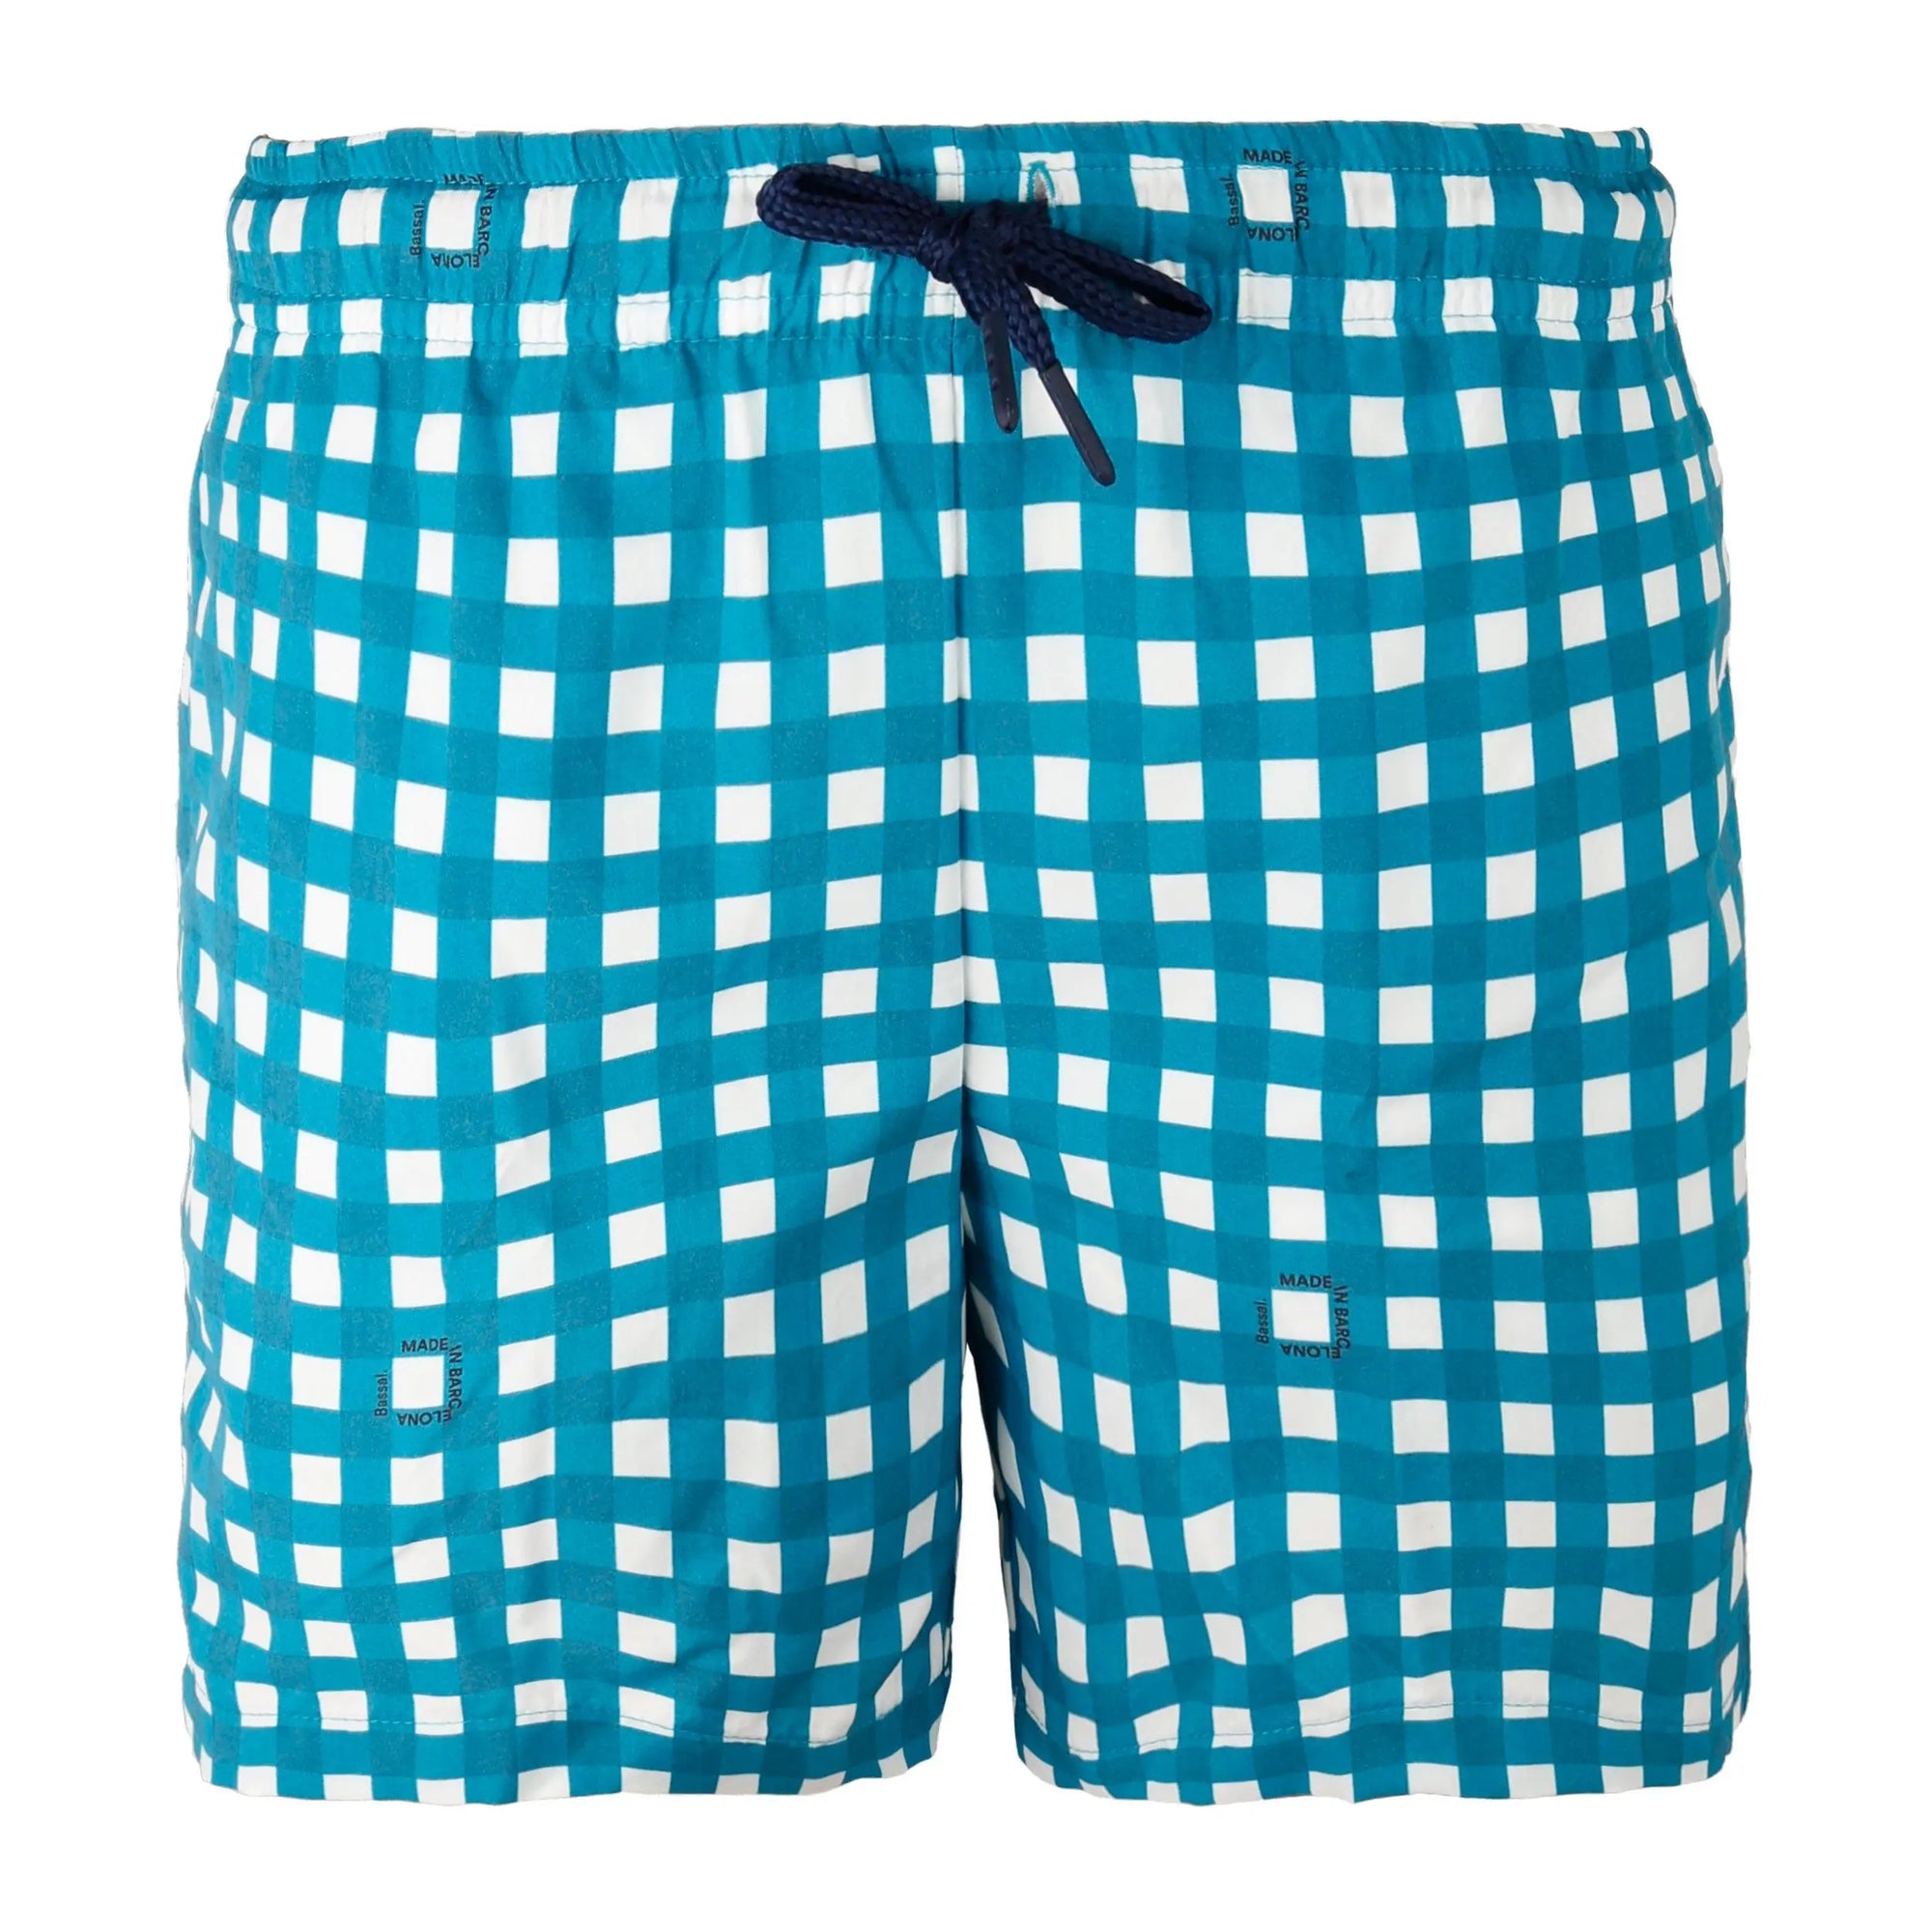 A pair of blue and white checkered Vichy Kids Swimwear with a navy drawstring is neatly folded inside an open orange box. Attached to the swimwear is a white tag with the brand name "Bassal." The box, featuring the "Bassalstore" logo, is placed on top of another box in a chic store in Barcelona.